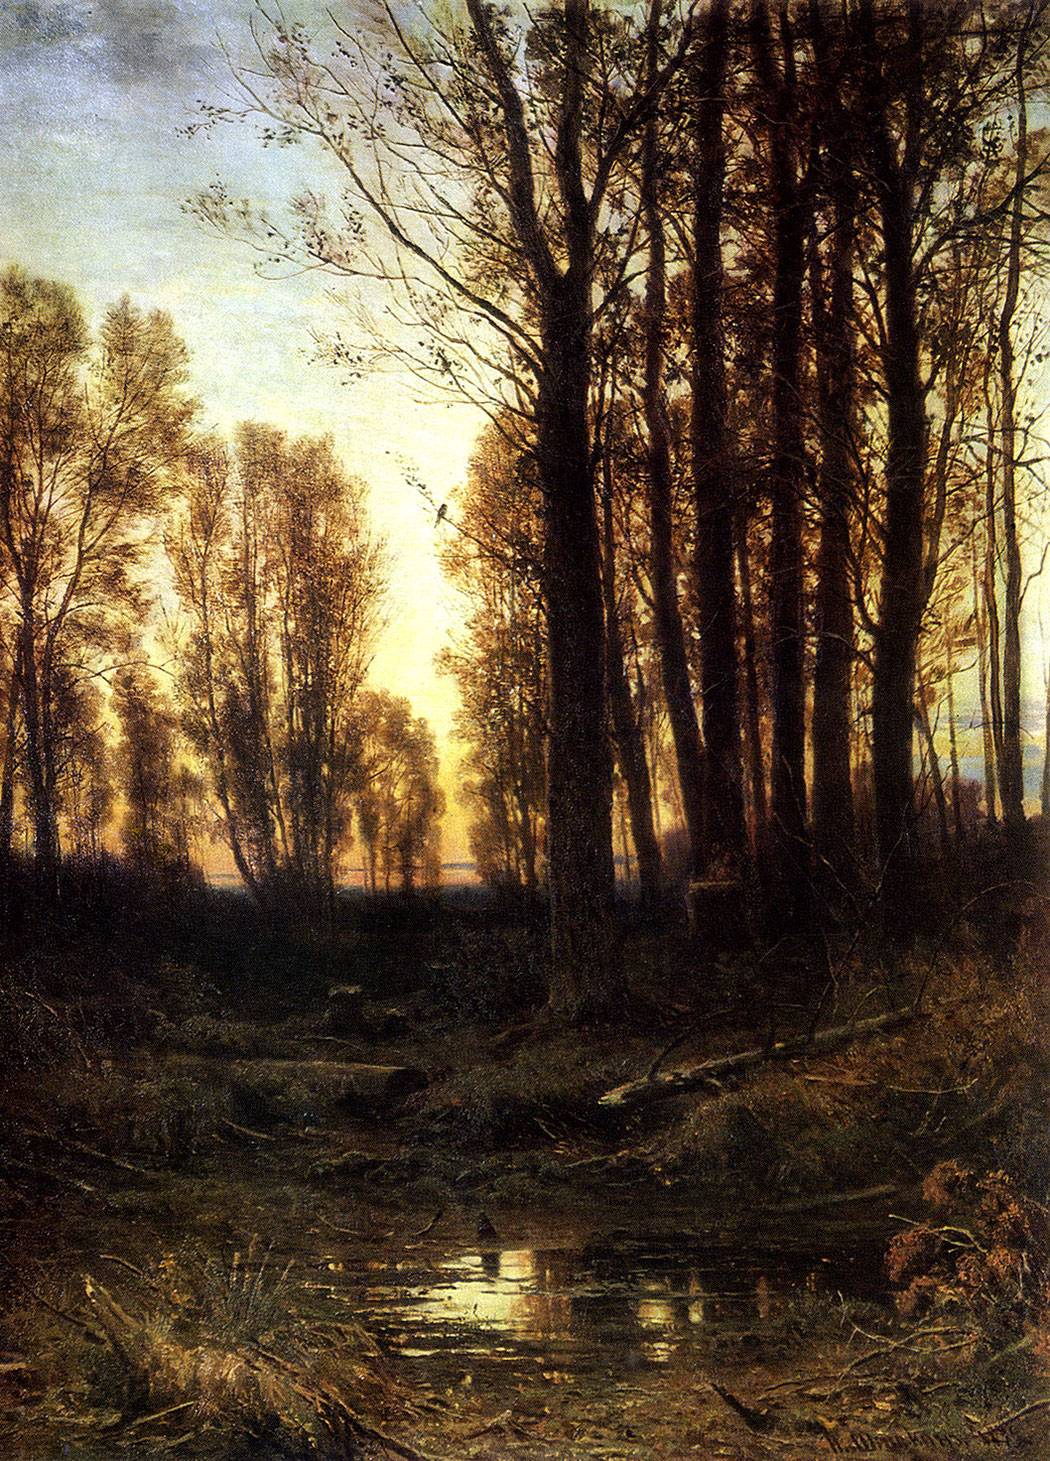 88. Twilight. After sunset. 1879. Oil on canvas. 96X76 cm. Museum of Russian Art, Kiev